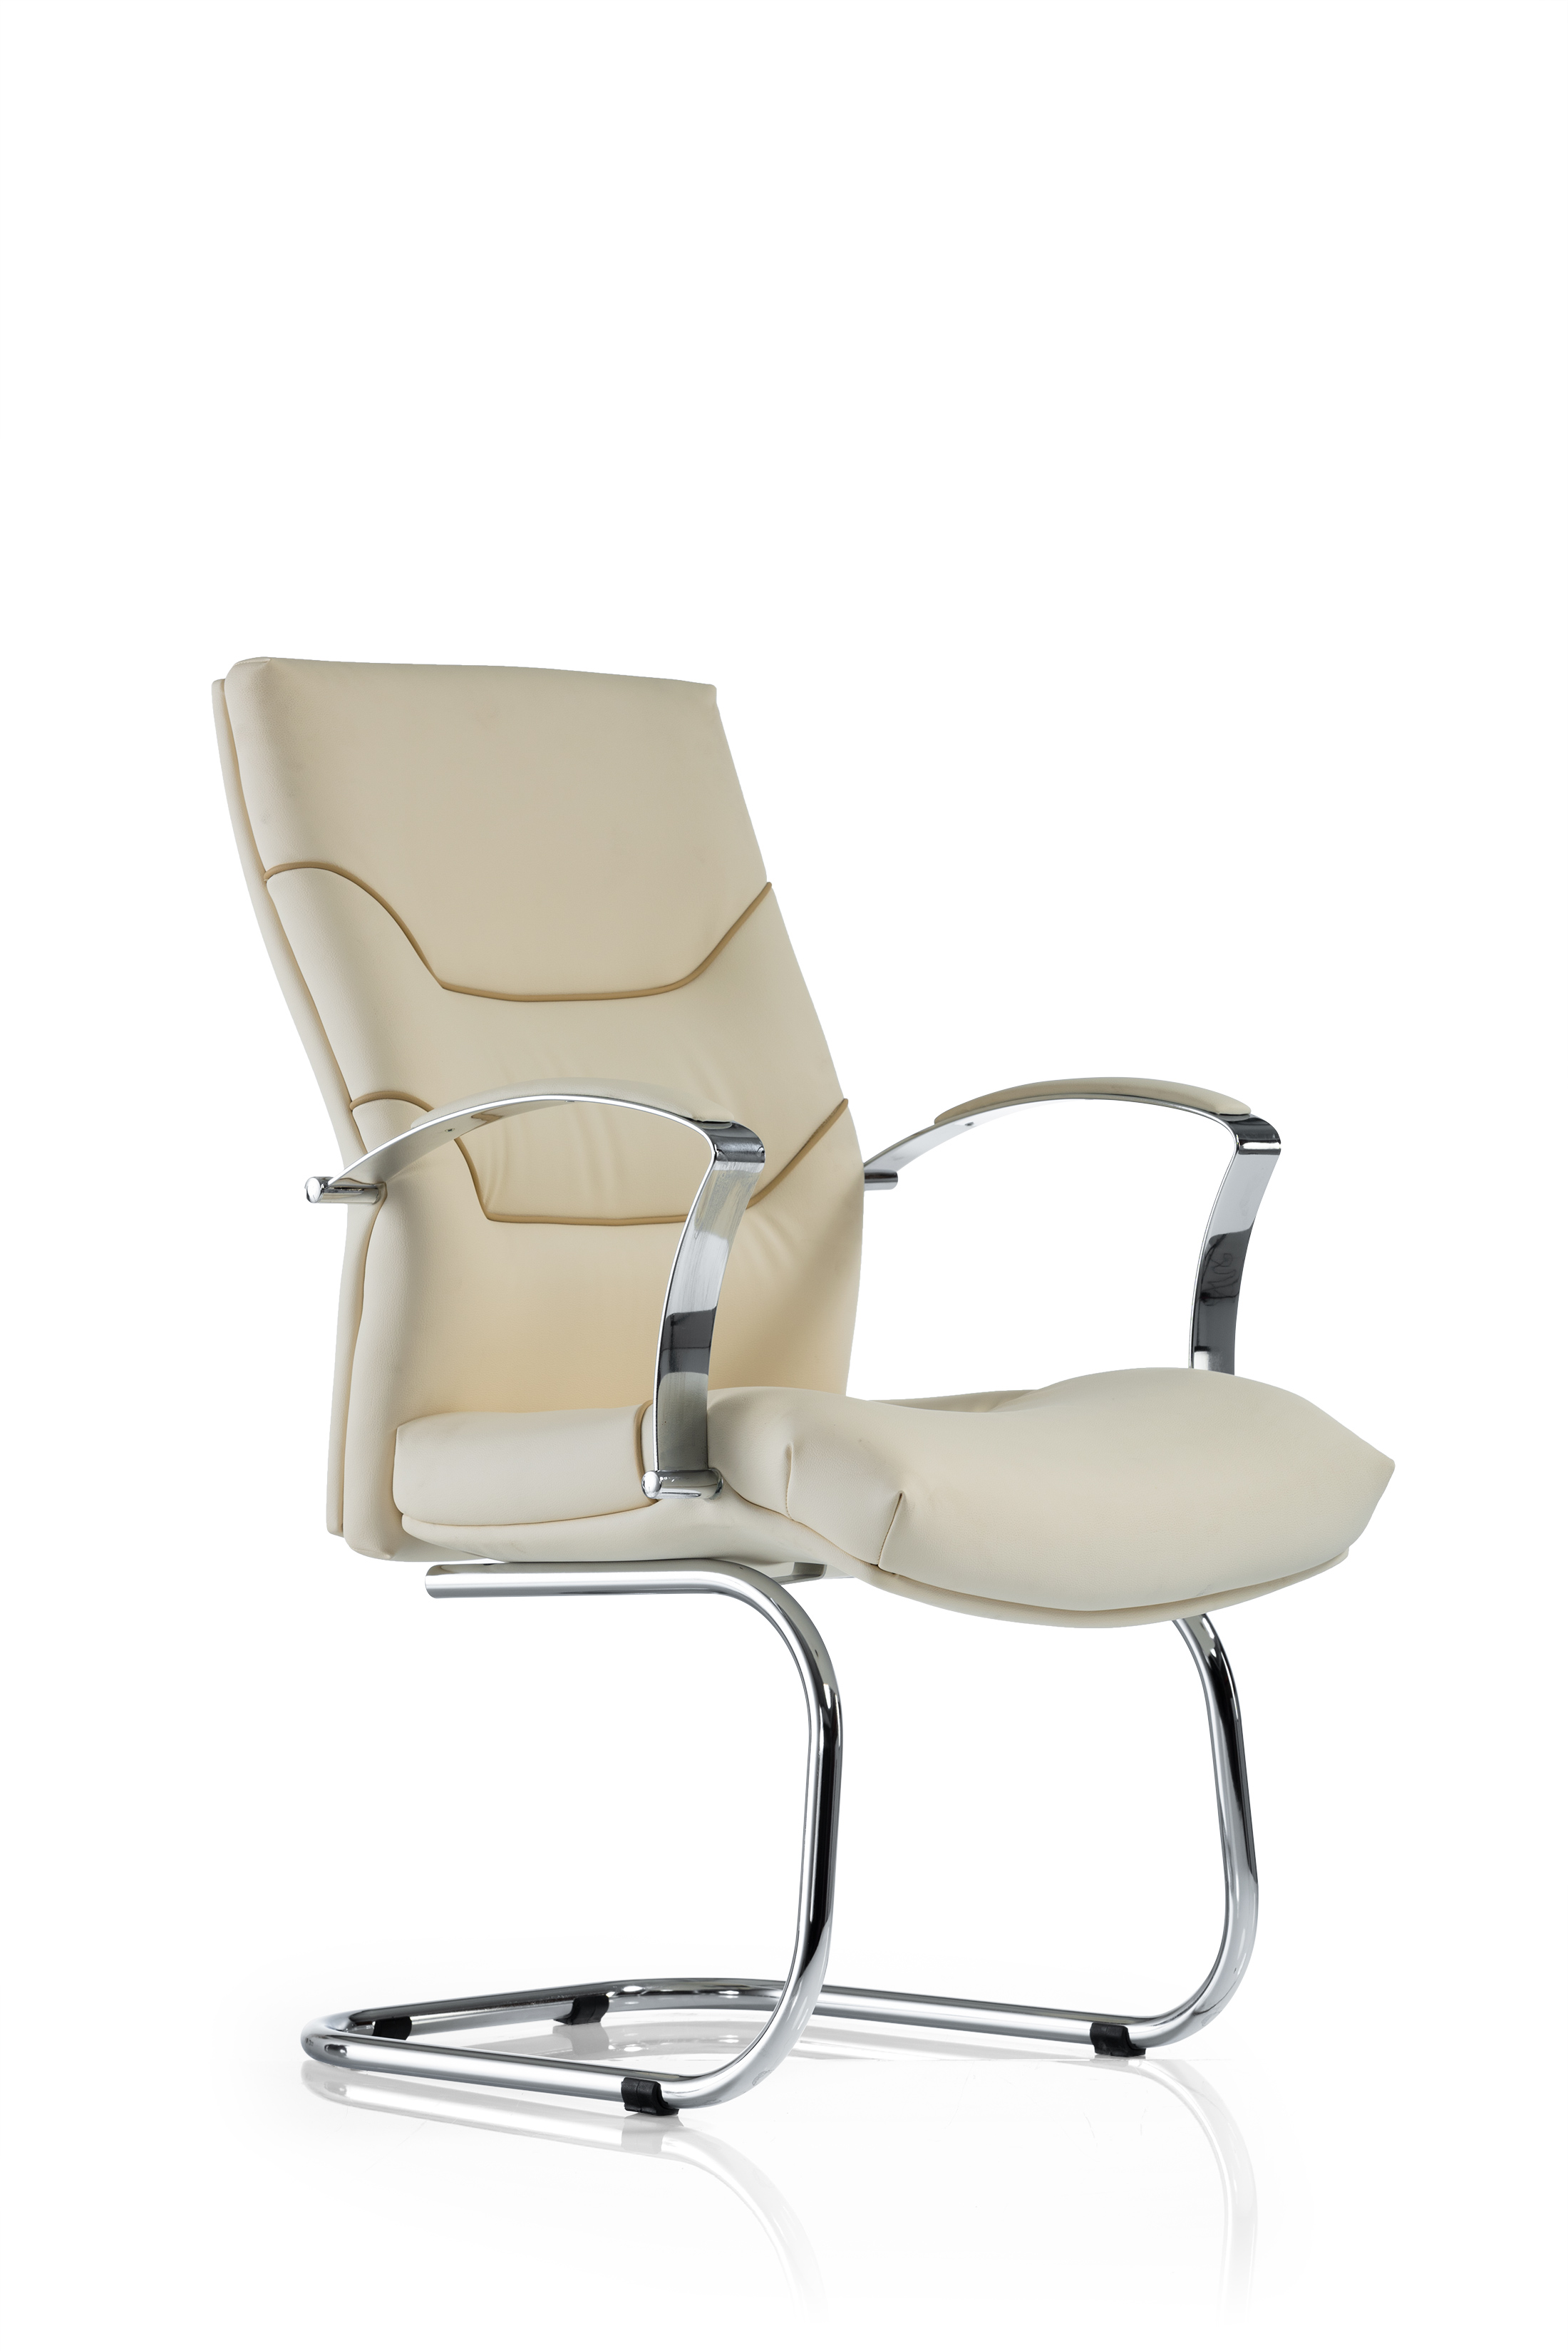 PIEDRA 300C VISITOR CHAIR